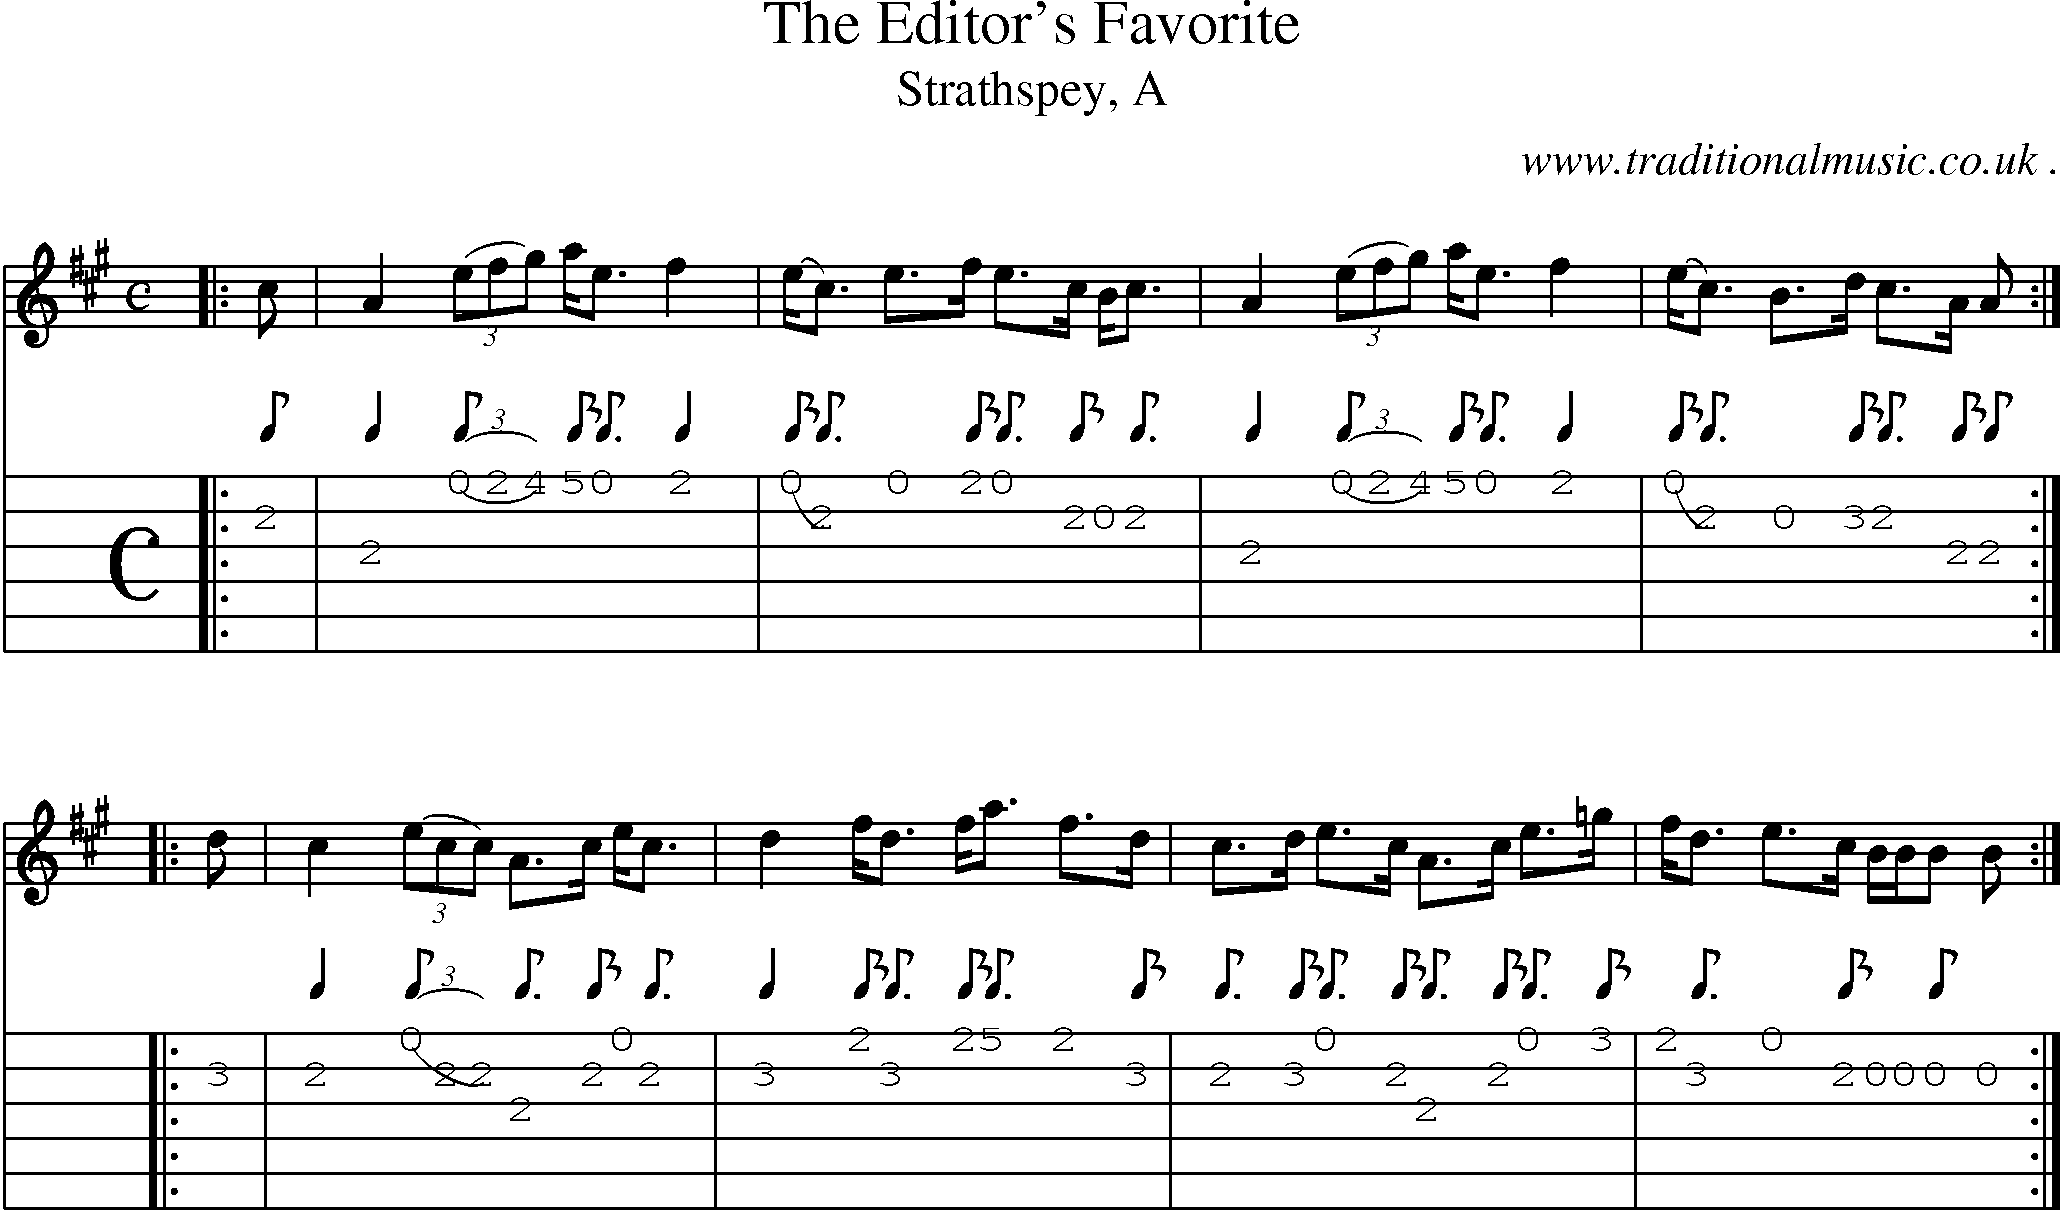 Sheet-music  score, Chords and Guitar Tabs for The Editors Favorite